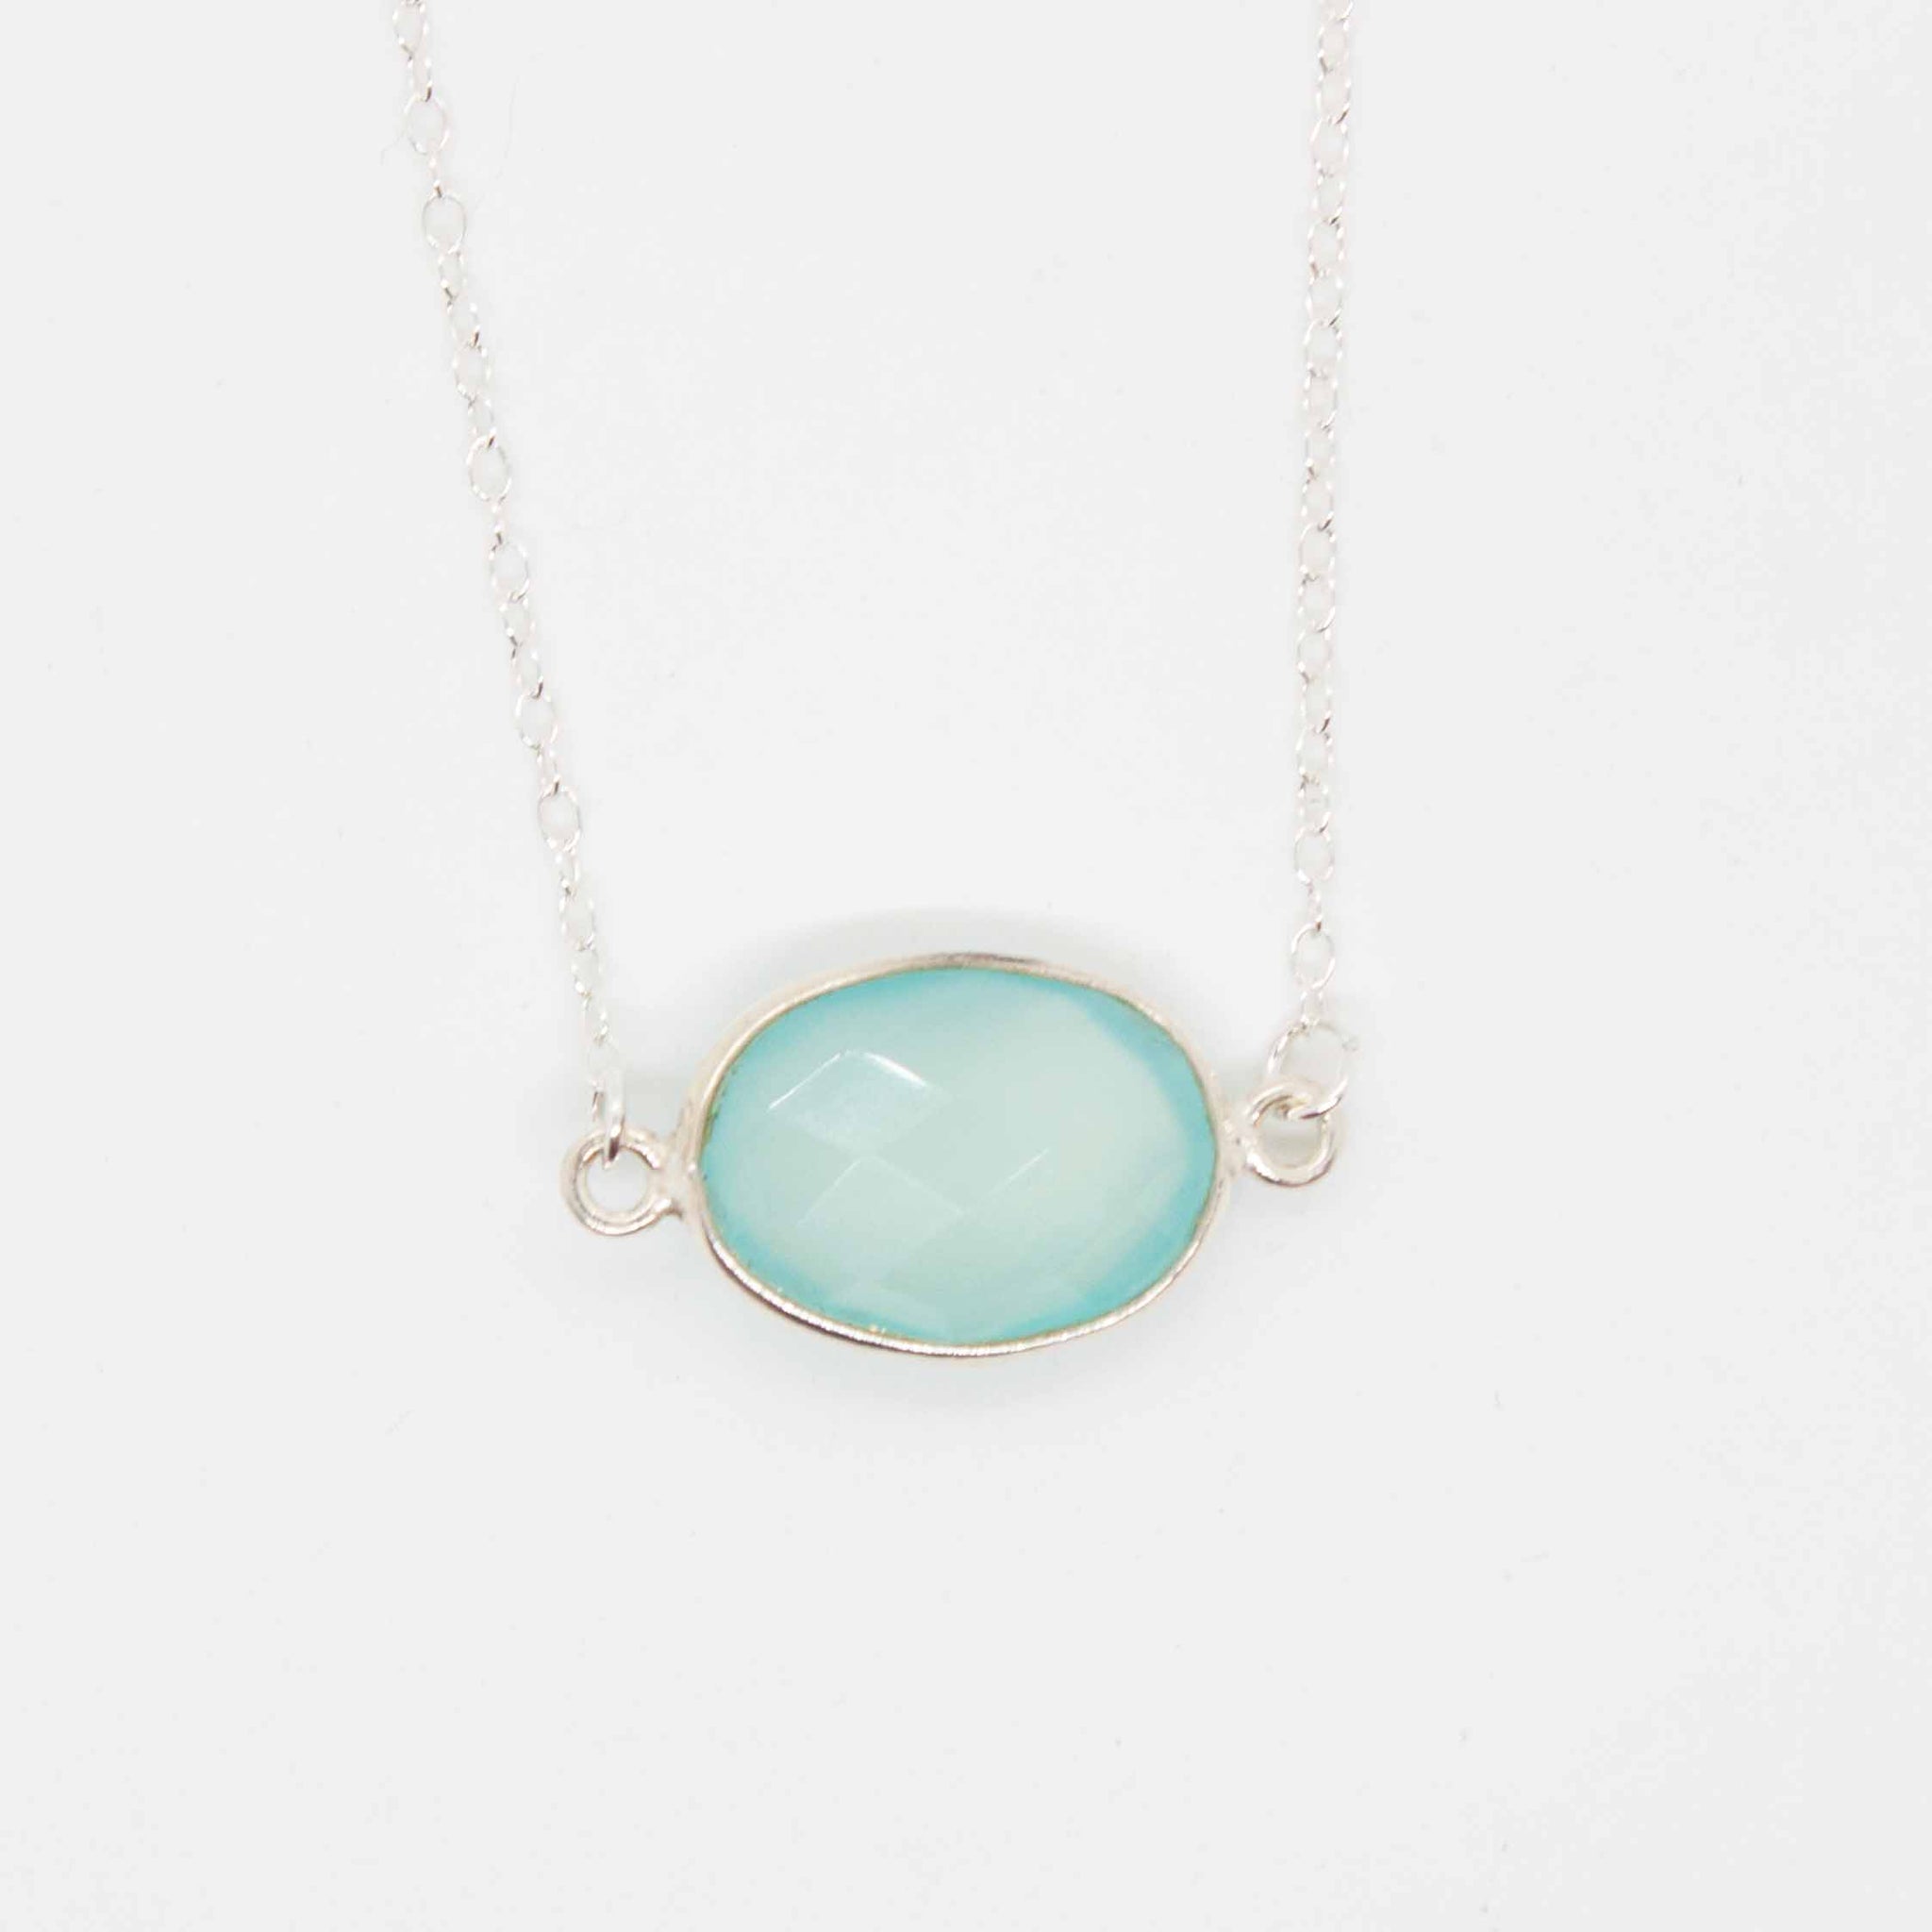 Summon the ocean with this classically beautiful chalcedony pendant necklace.  18 or 20 inch sterling silver necklace with oval chalcedony pendant. Handmade in Toronto by kp jewelry co.